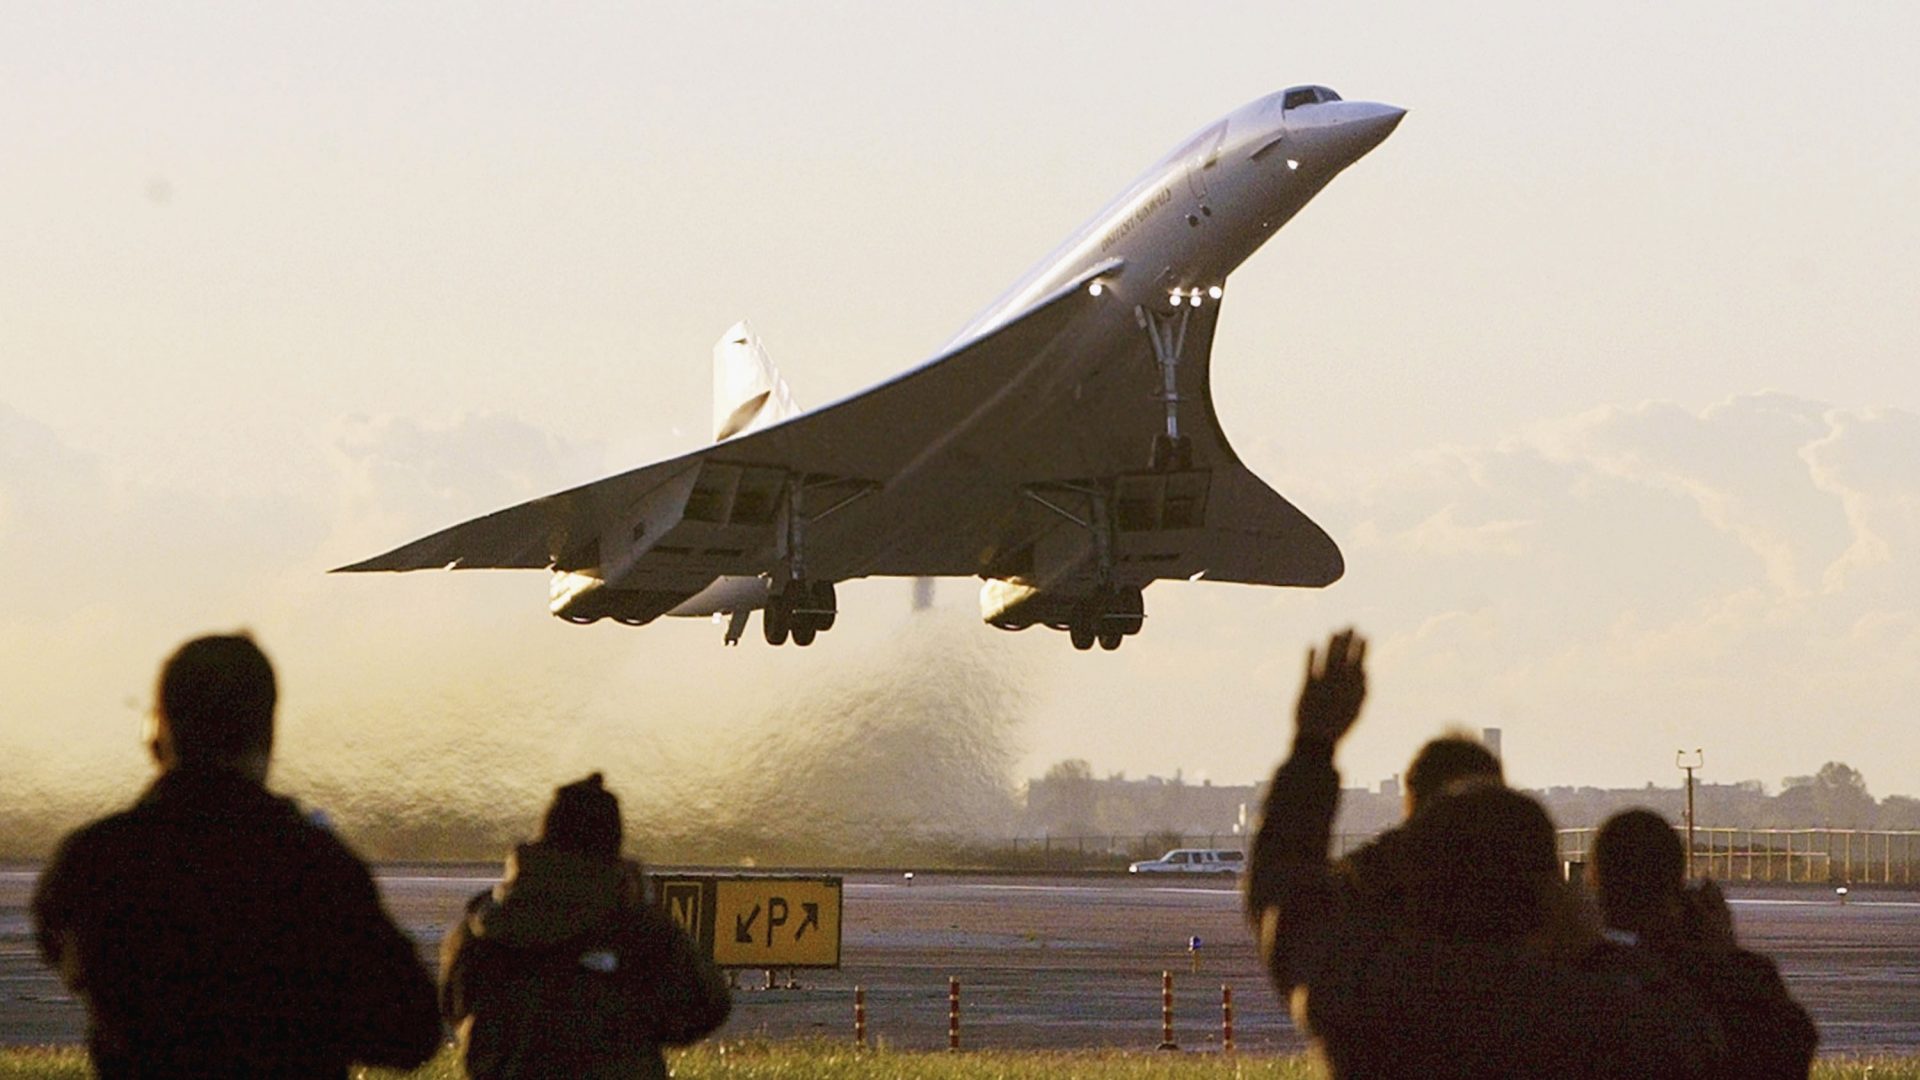 The last-ever Concorde passenger flight takes off from John F Kennedy International airport in New York en route to London, October 24 2003. Photo: Mario Tama/Getty